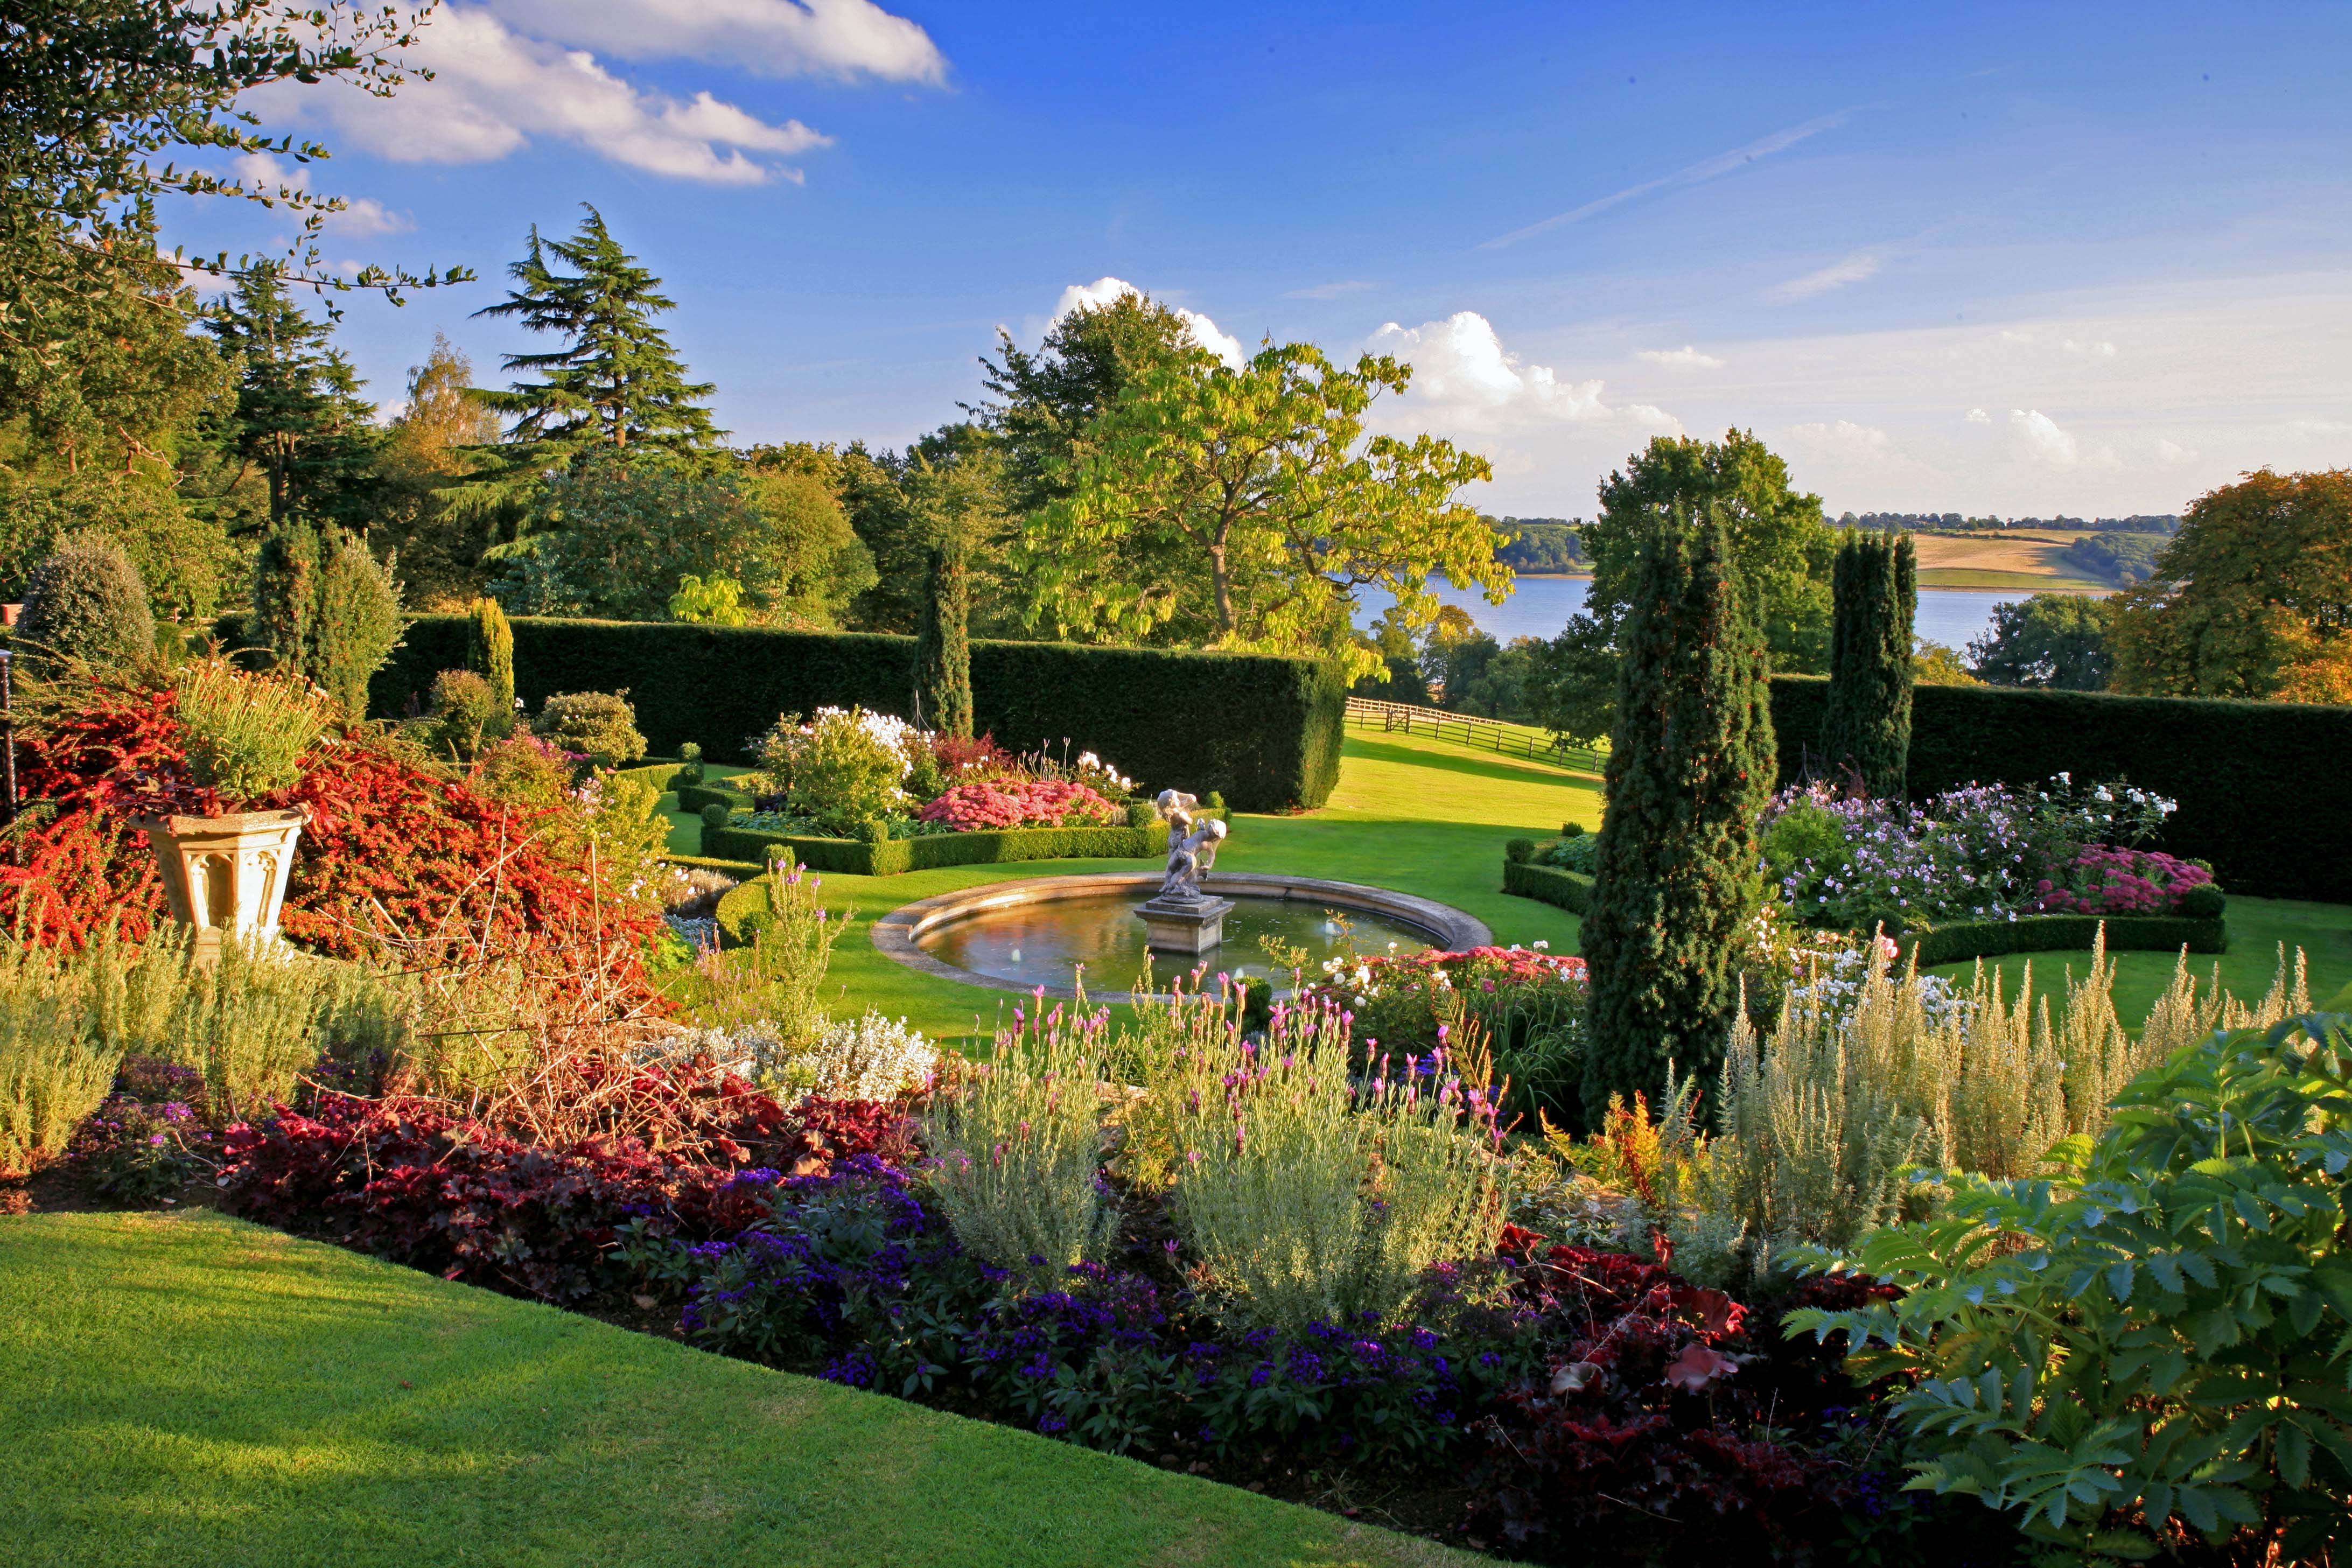 Summer in the grounds of Hambleton Hall.